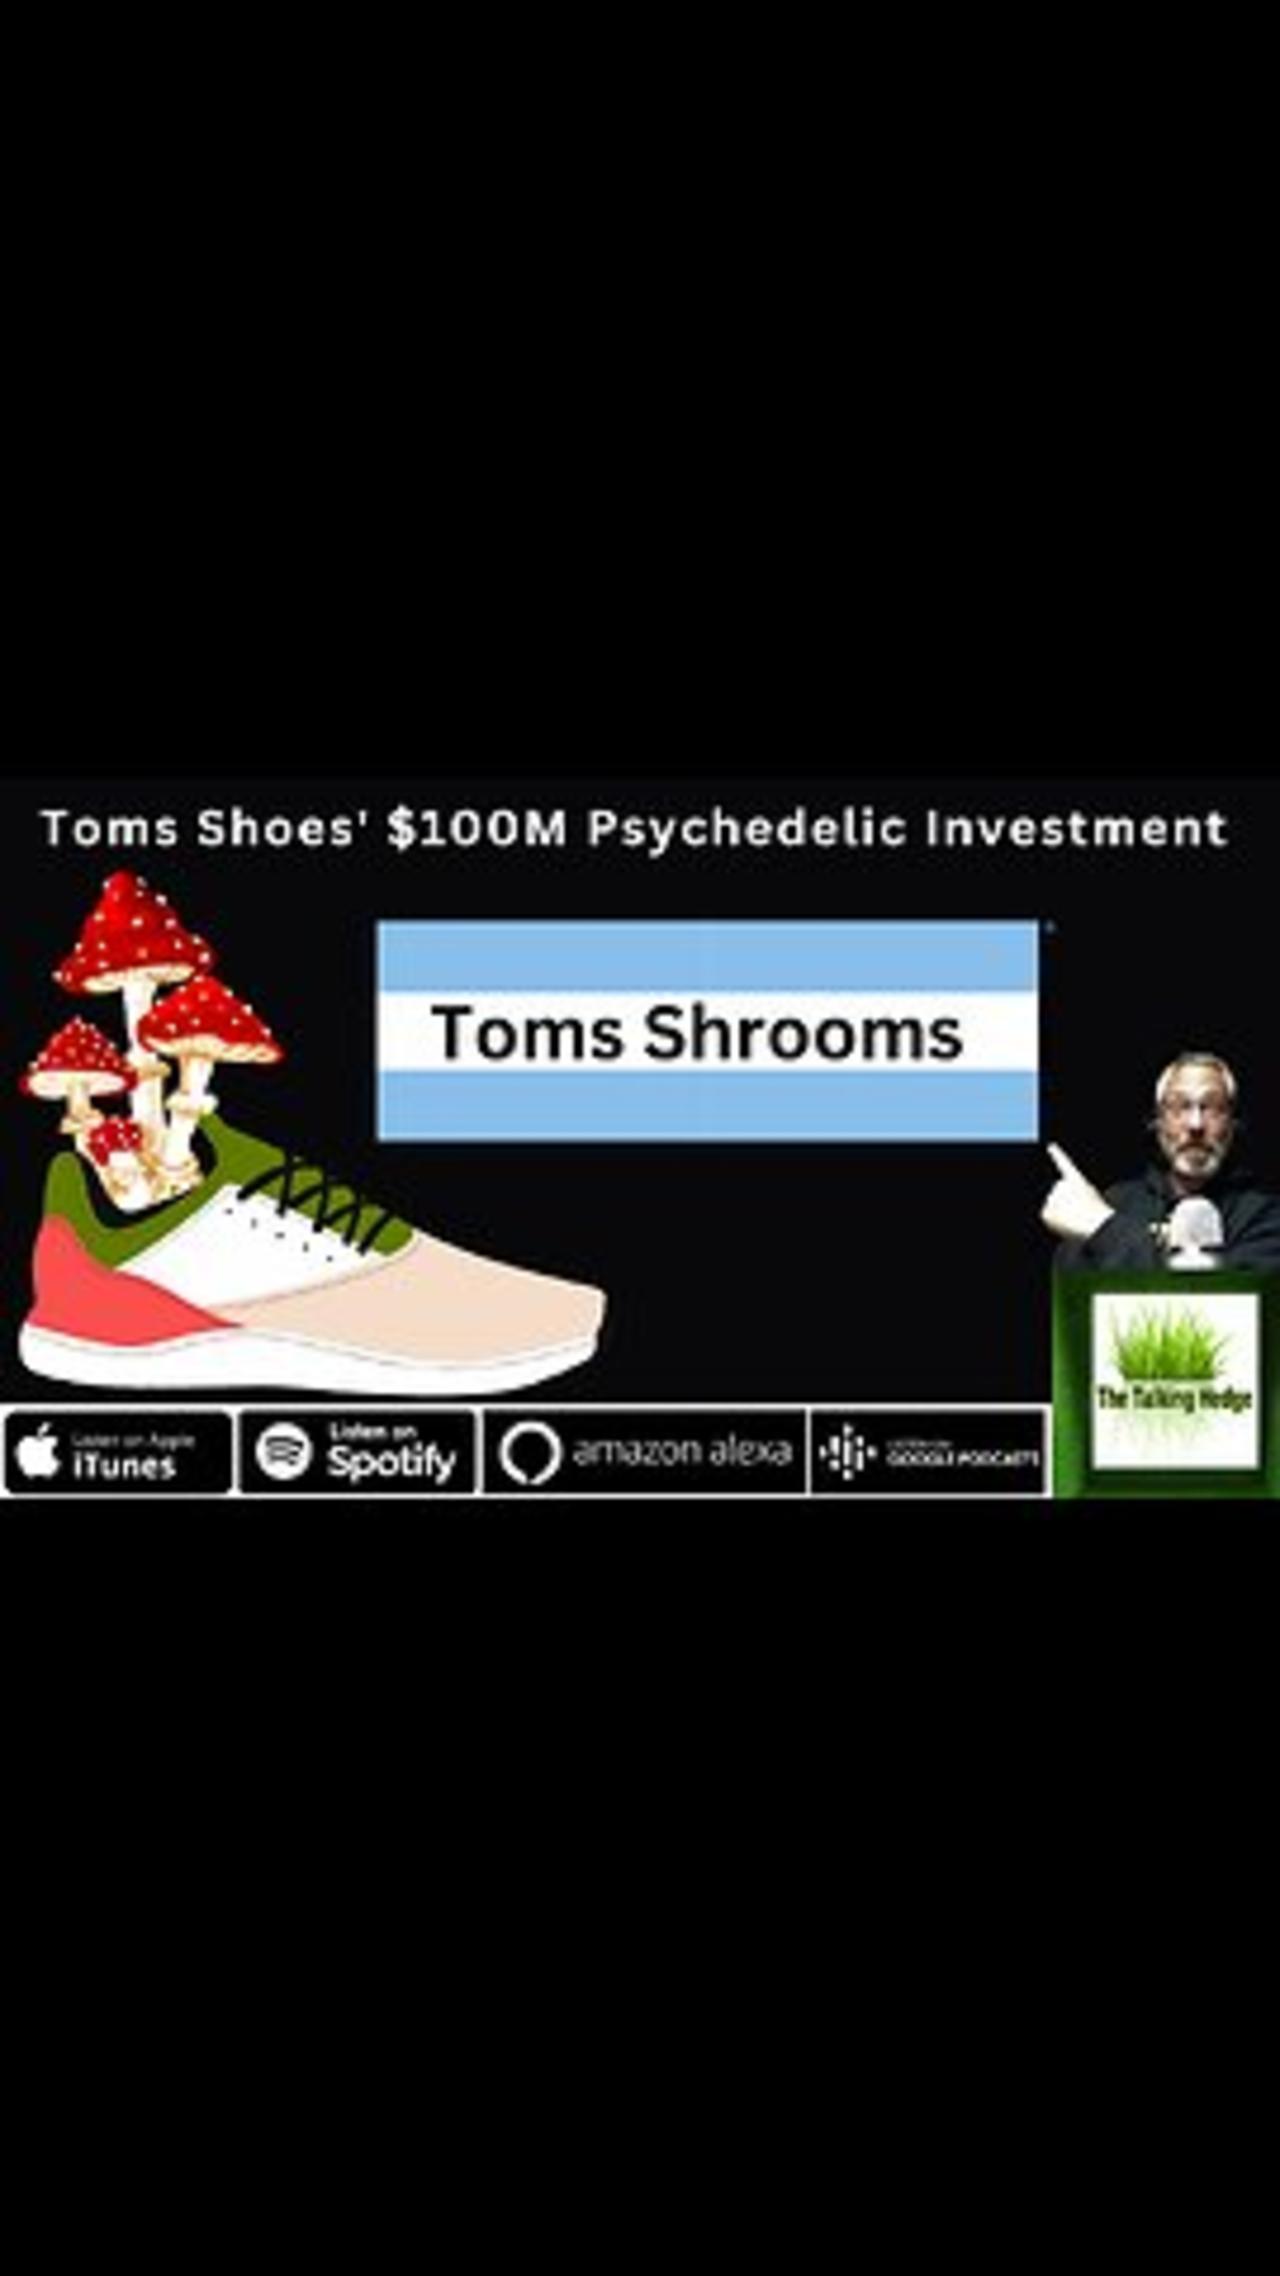 Toms Shoes Founder Donates $100M to Psychedelic Research